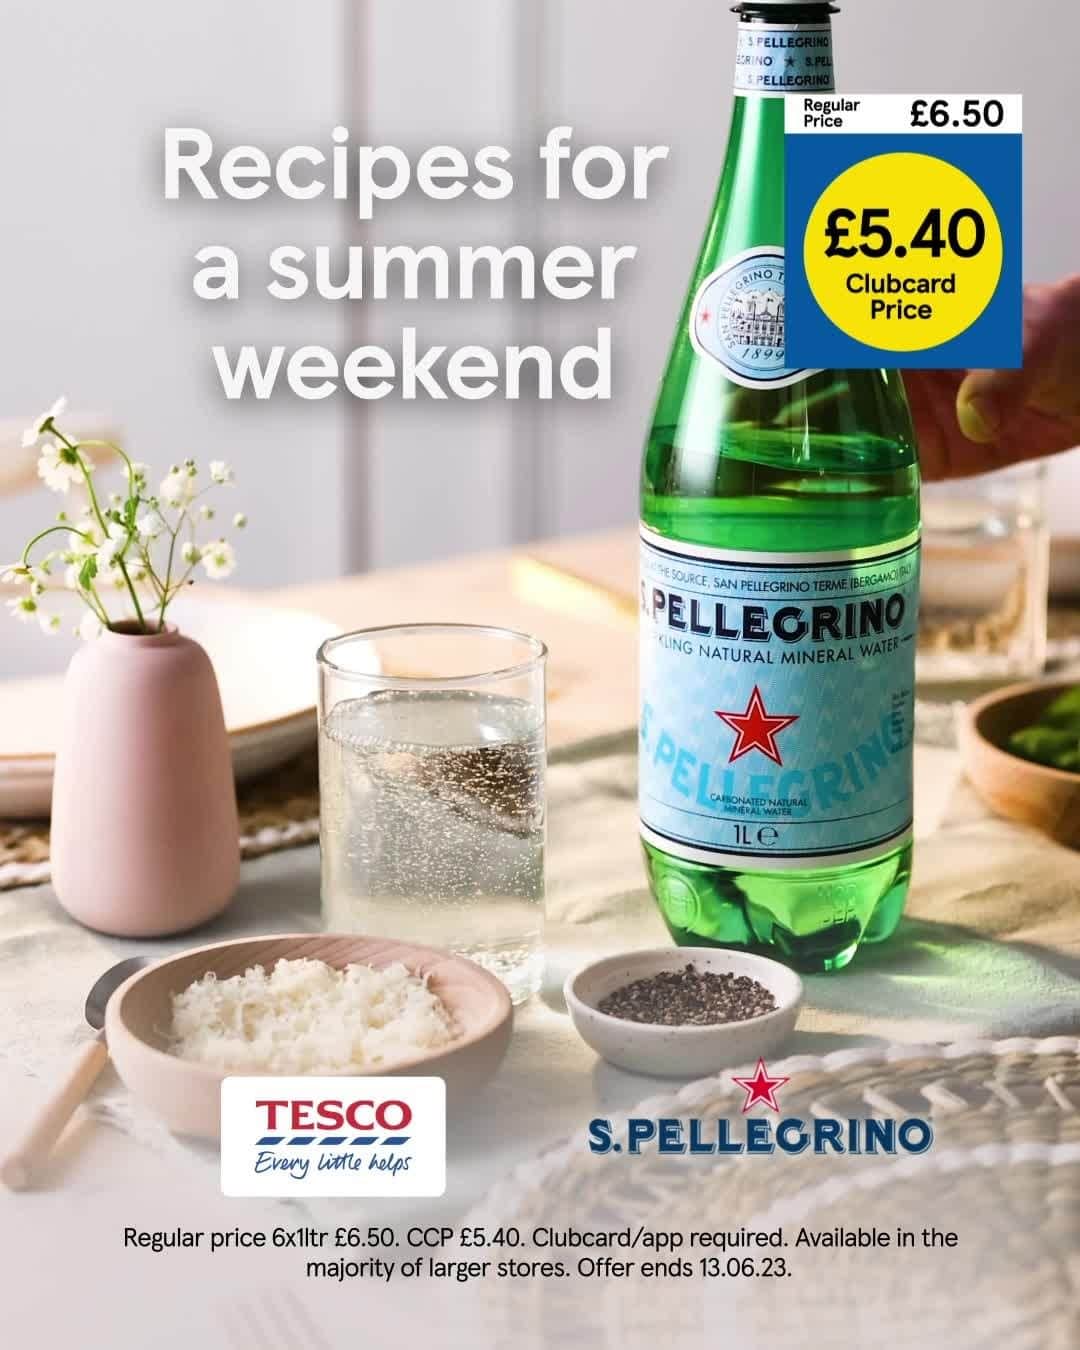 Tesco Food Officialのインスタグラム：「Inspired by the flavours of Italy, these three recipes will see you through from Friday night dinner to Sunday picnics. Add a bottle of San Pellegrino sparkling water to make summer dining more special. Its gentle bubbles and balance of minerals make it ideal for pairing with food. Head to the link in our bio for the recipes.」